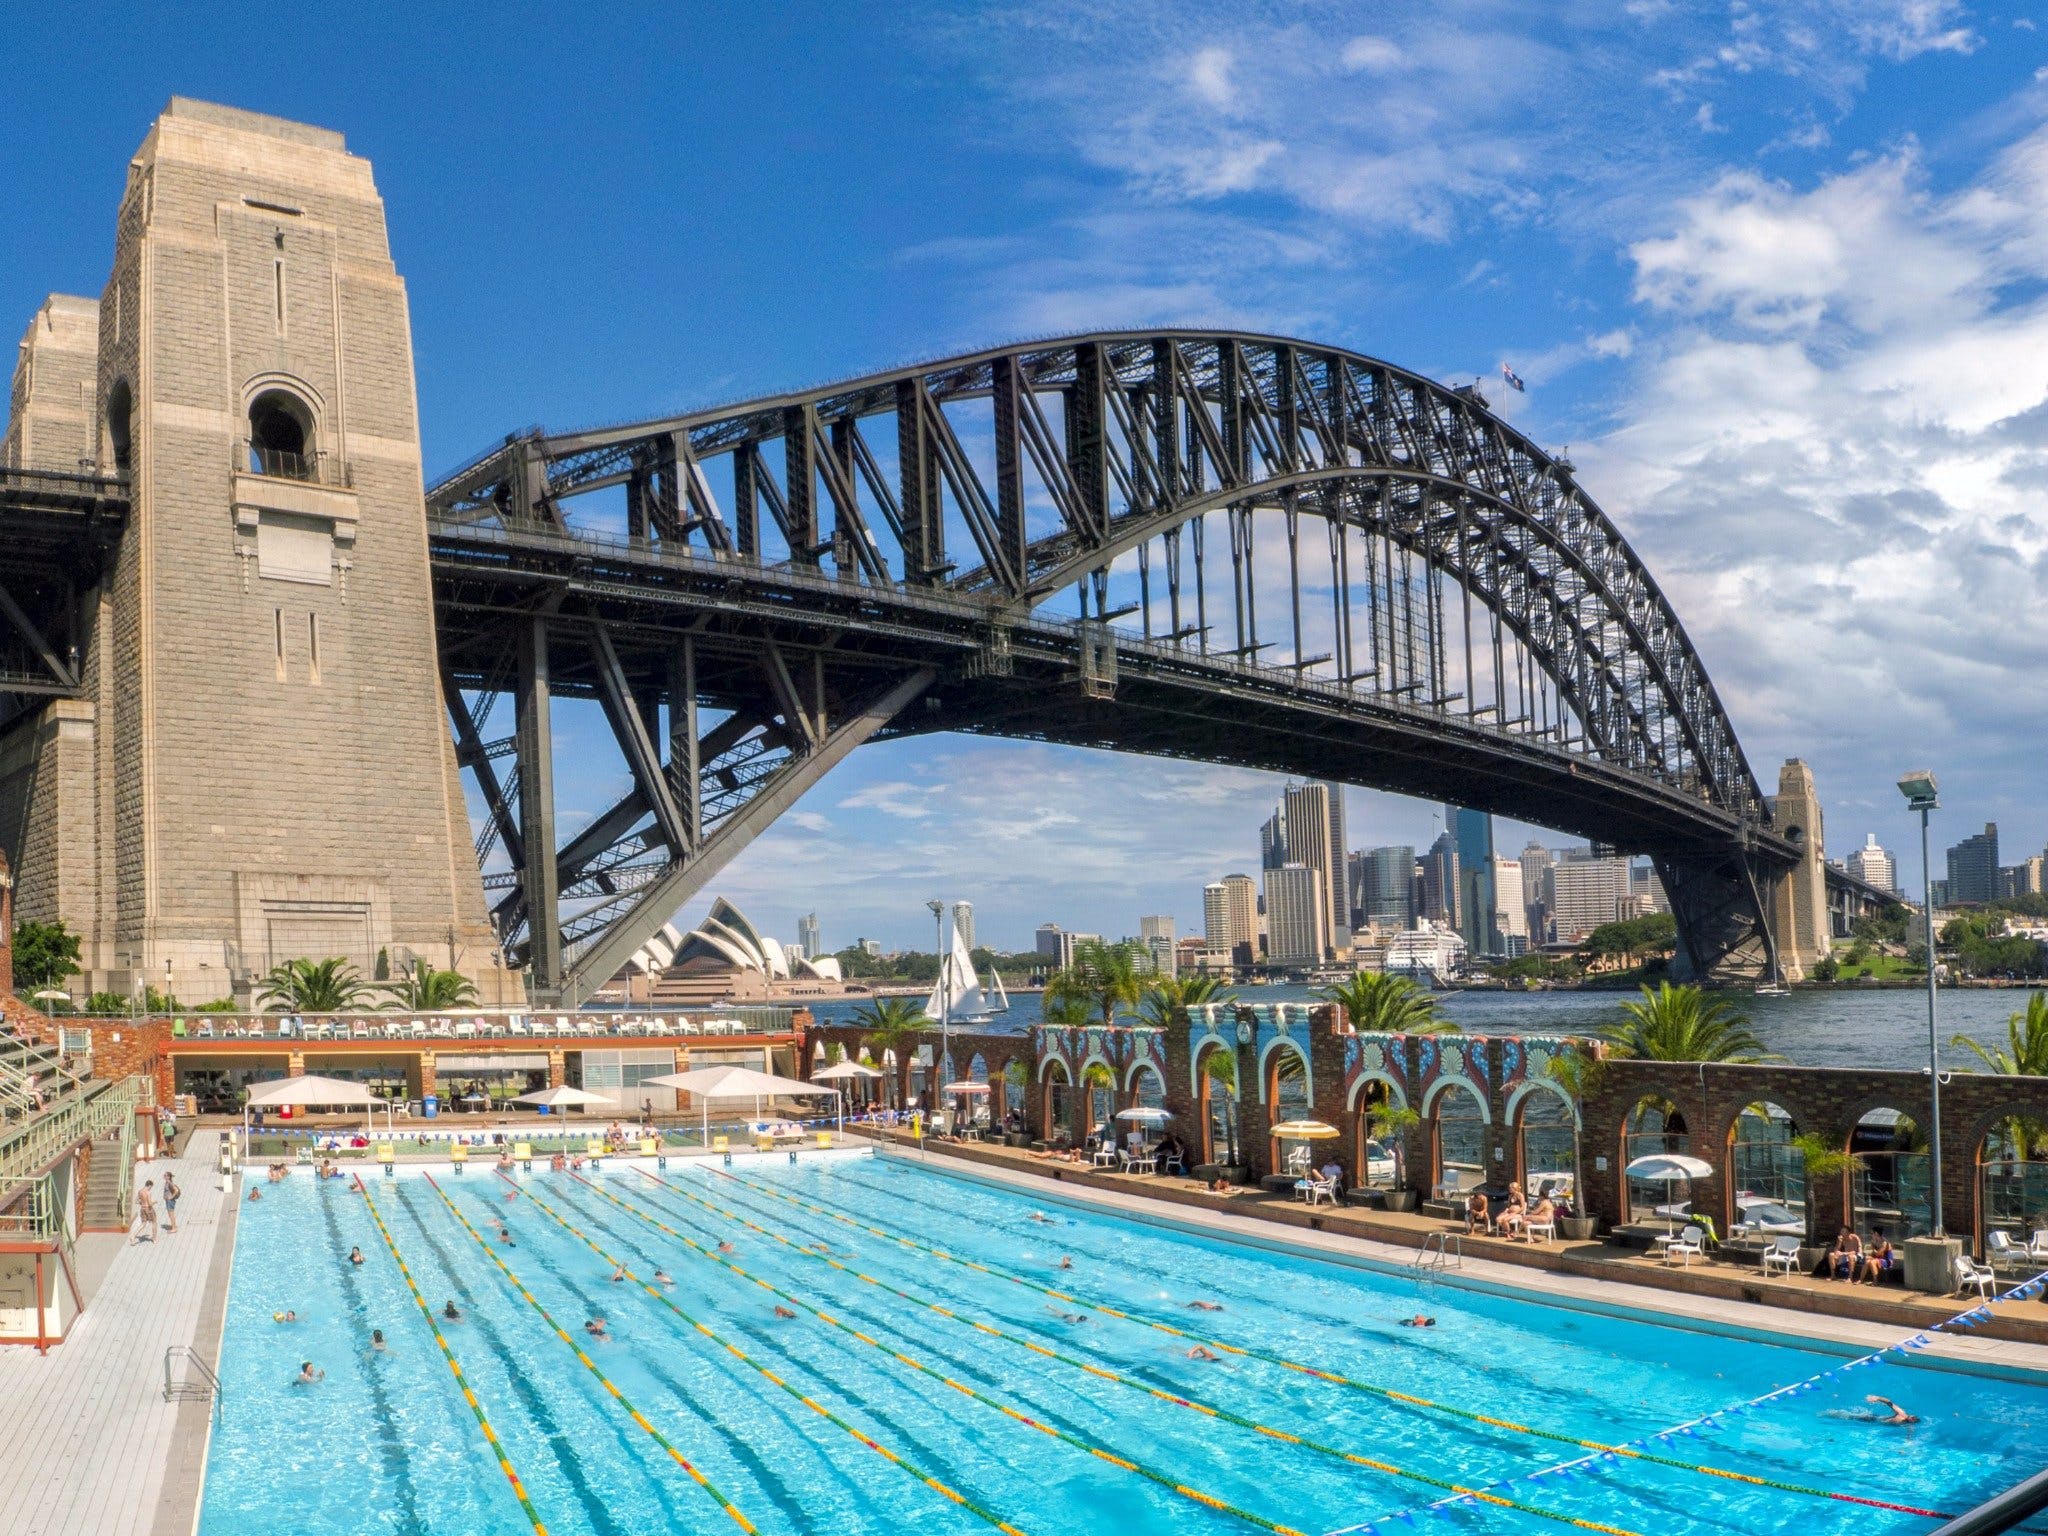 North Sydney Olympic Pool - Find Attractions